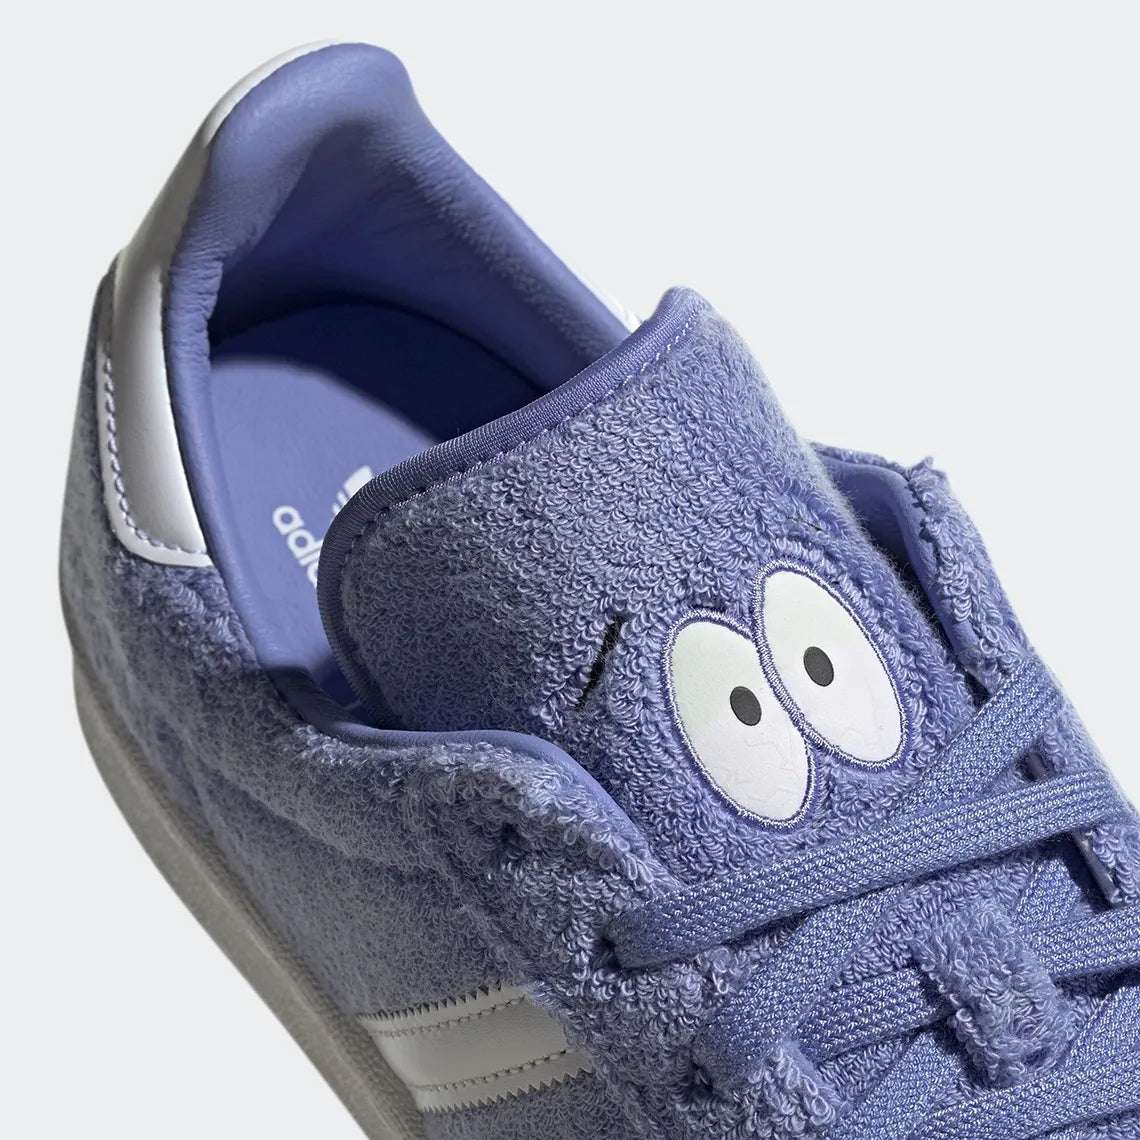 South Park x Adidas Campus 80s "Towelie" | GZ9177 | $299.99 | $299.99 | $299.99 | Shoes | Marching Dogs